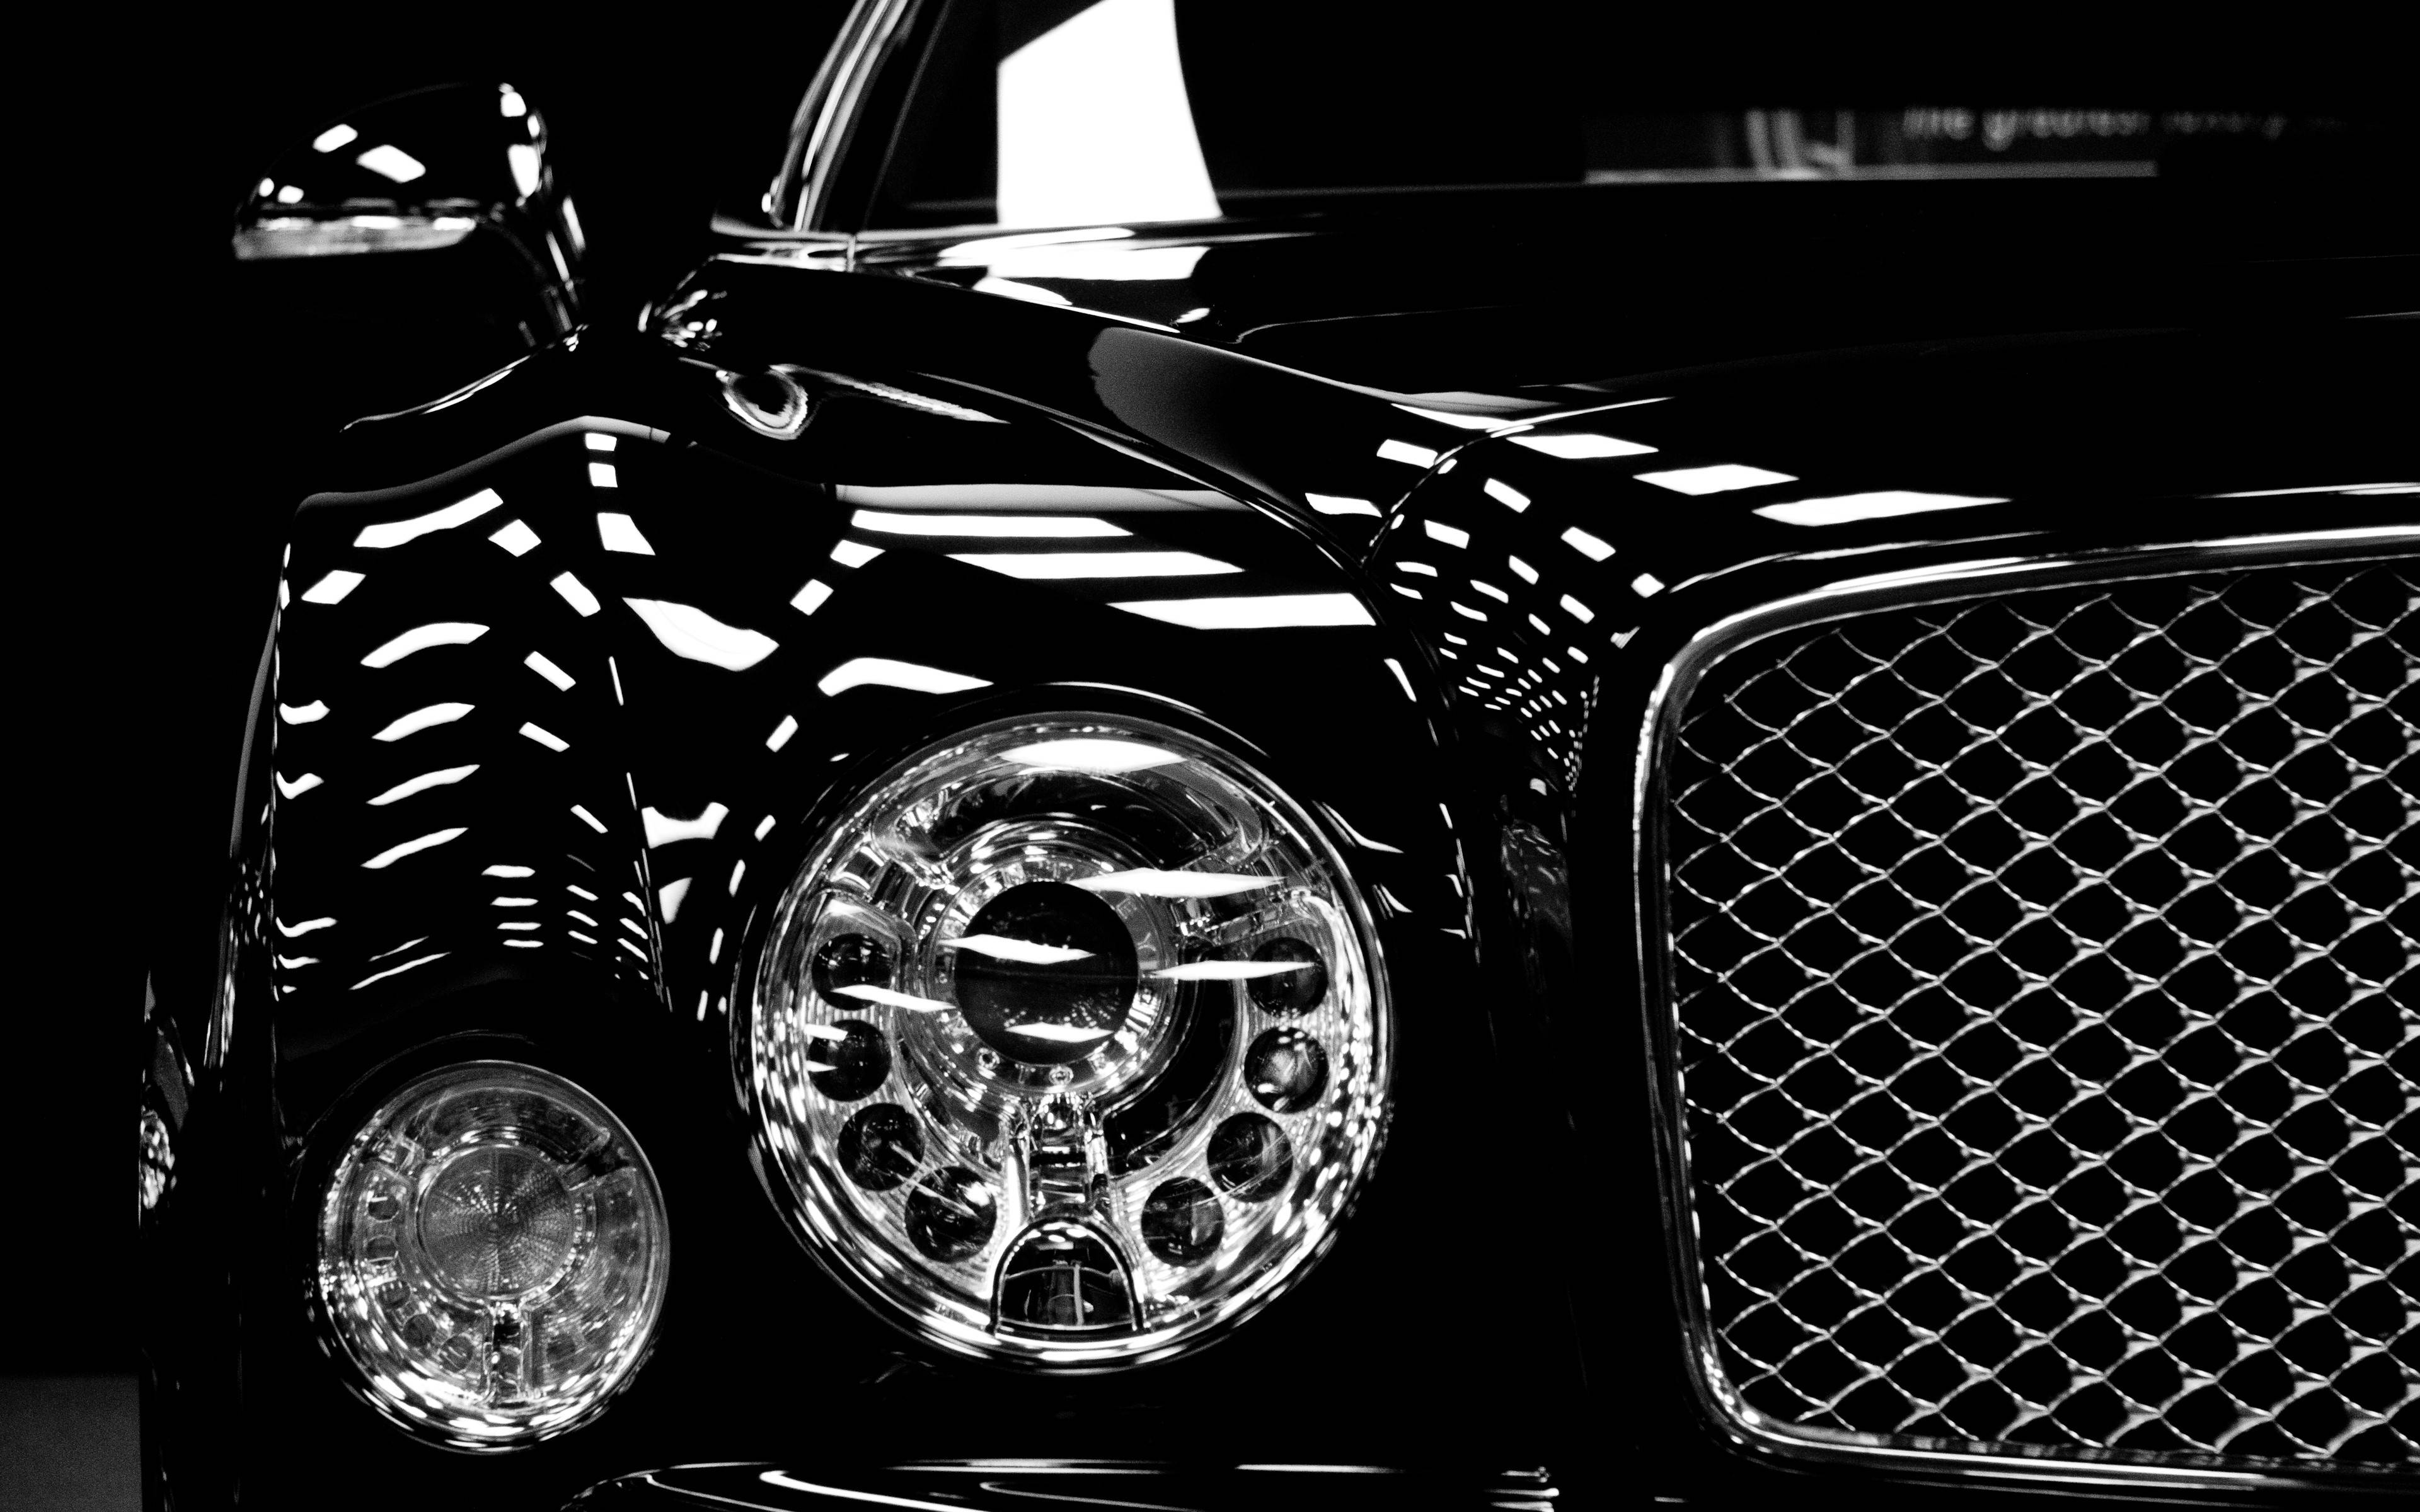 Black and White Car Wallpaper | Ultimate-wallpapers